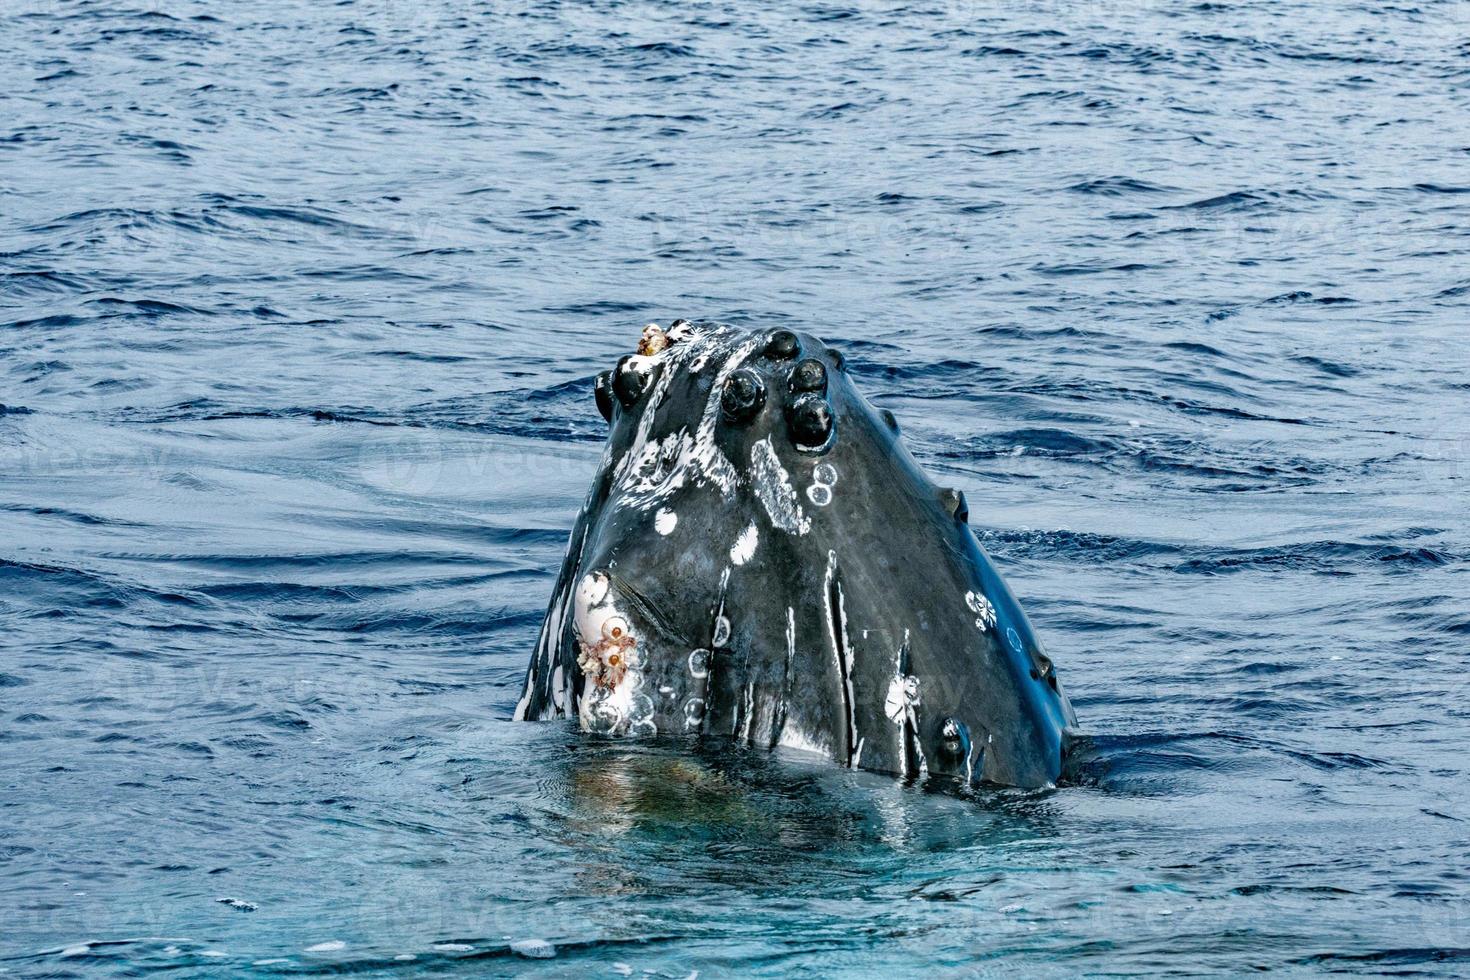 Humpback whale head coming up photo